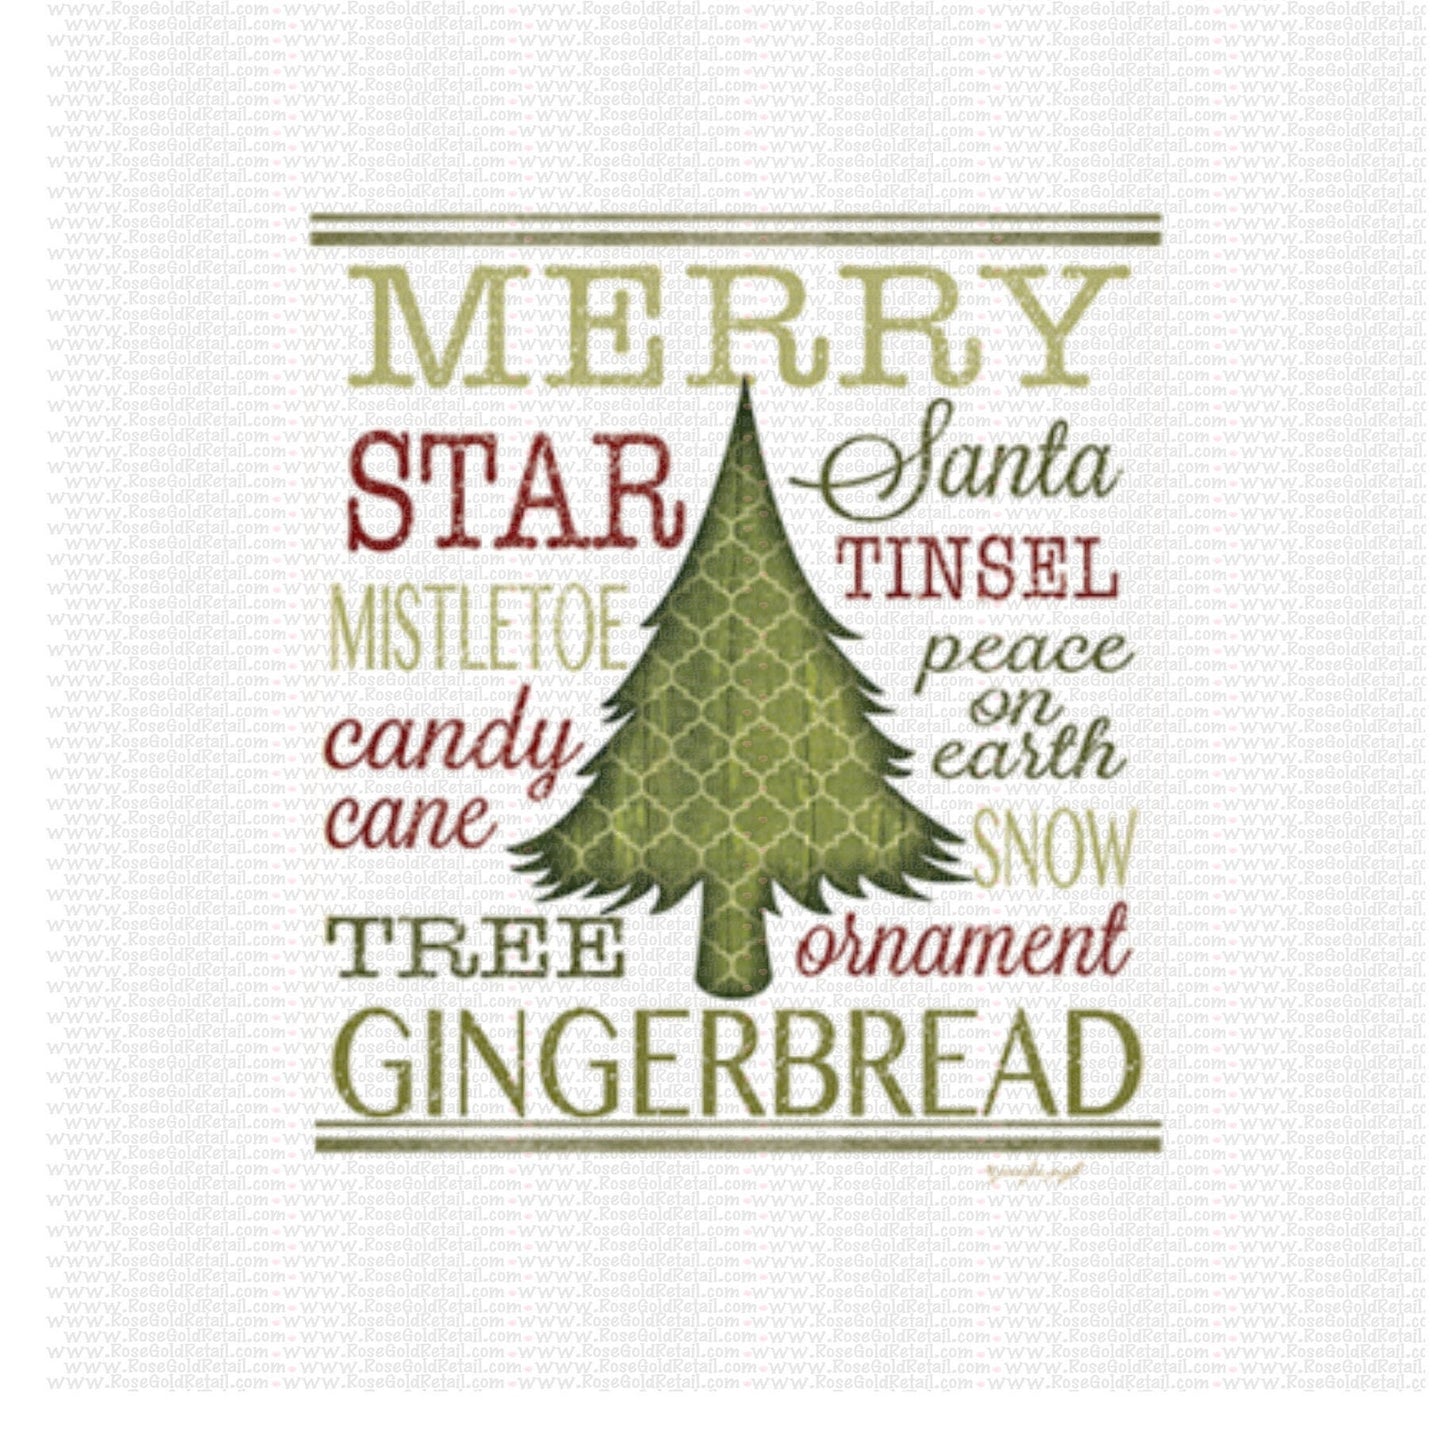 Merry Christmas Gingerbread Tree Festive Screen Print Design - Ready to Press, Ready to Ship Holiday Screen Print Design Shirt for Christmas